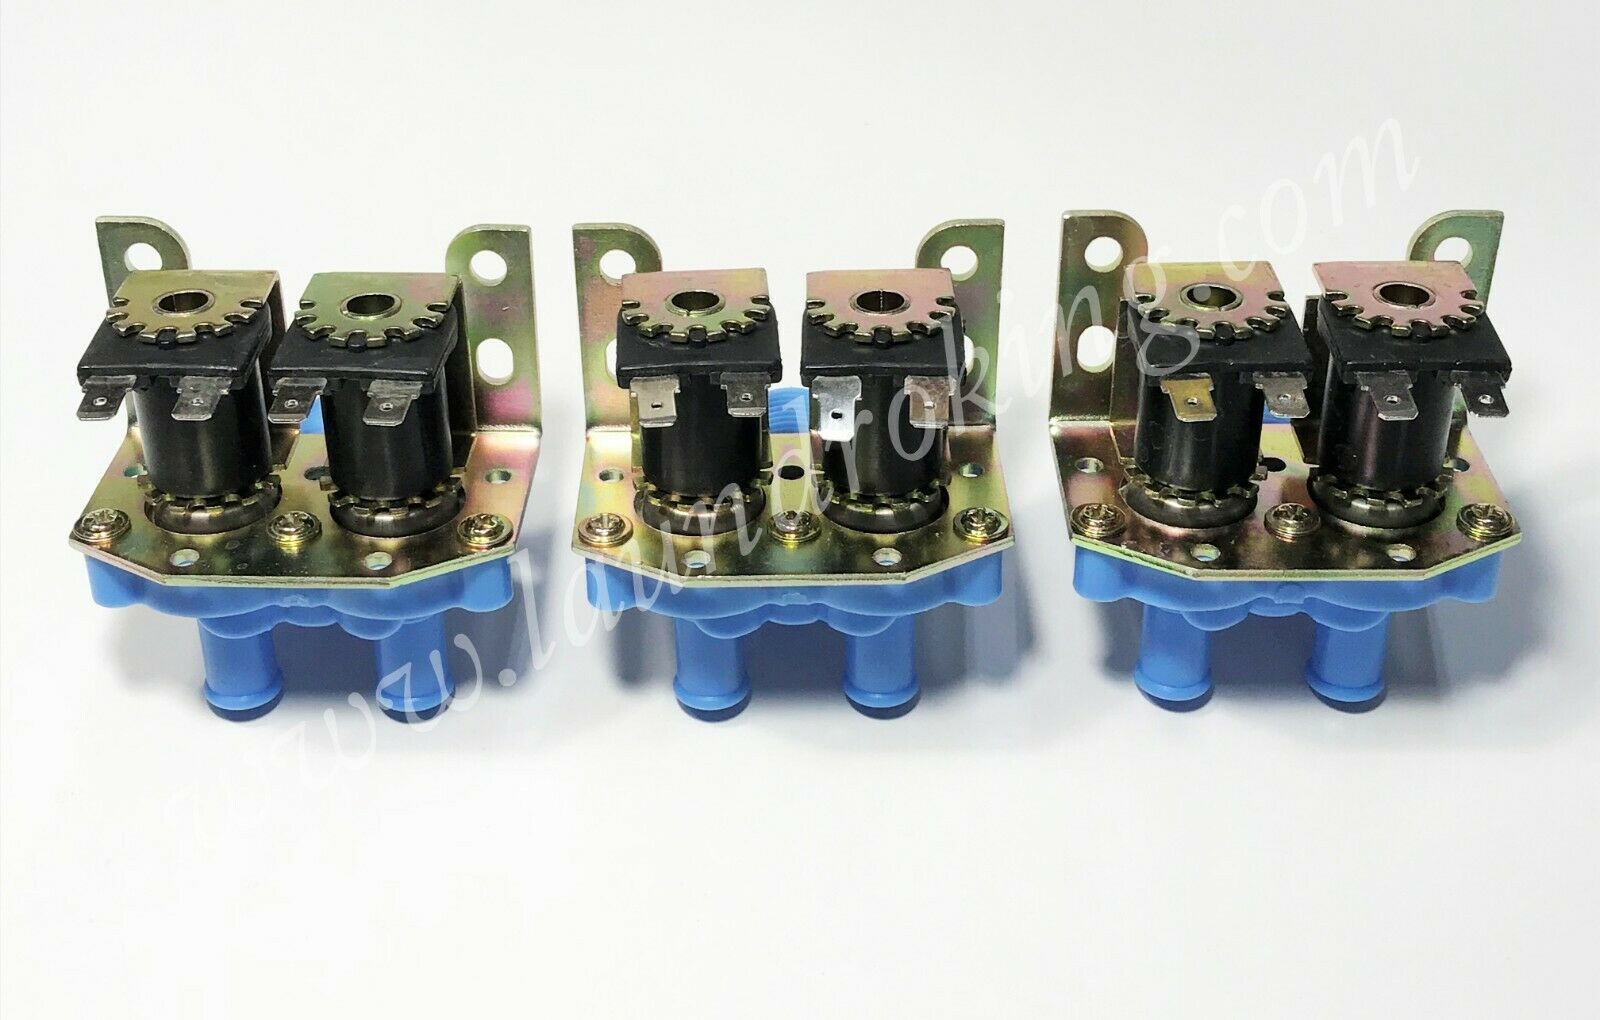 9379-183-001 (3 Pieces) High Quality Inlet  Water Valve  2 Way, 110v For Dexter